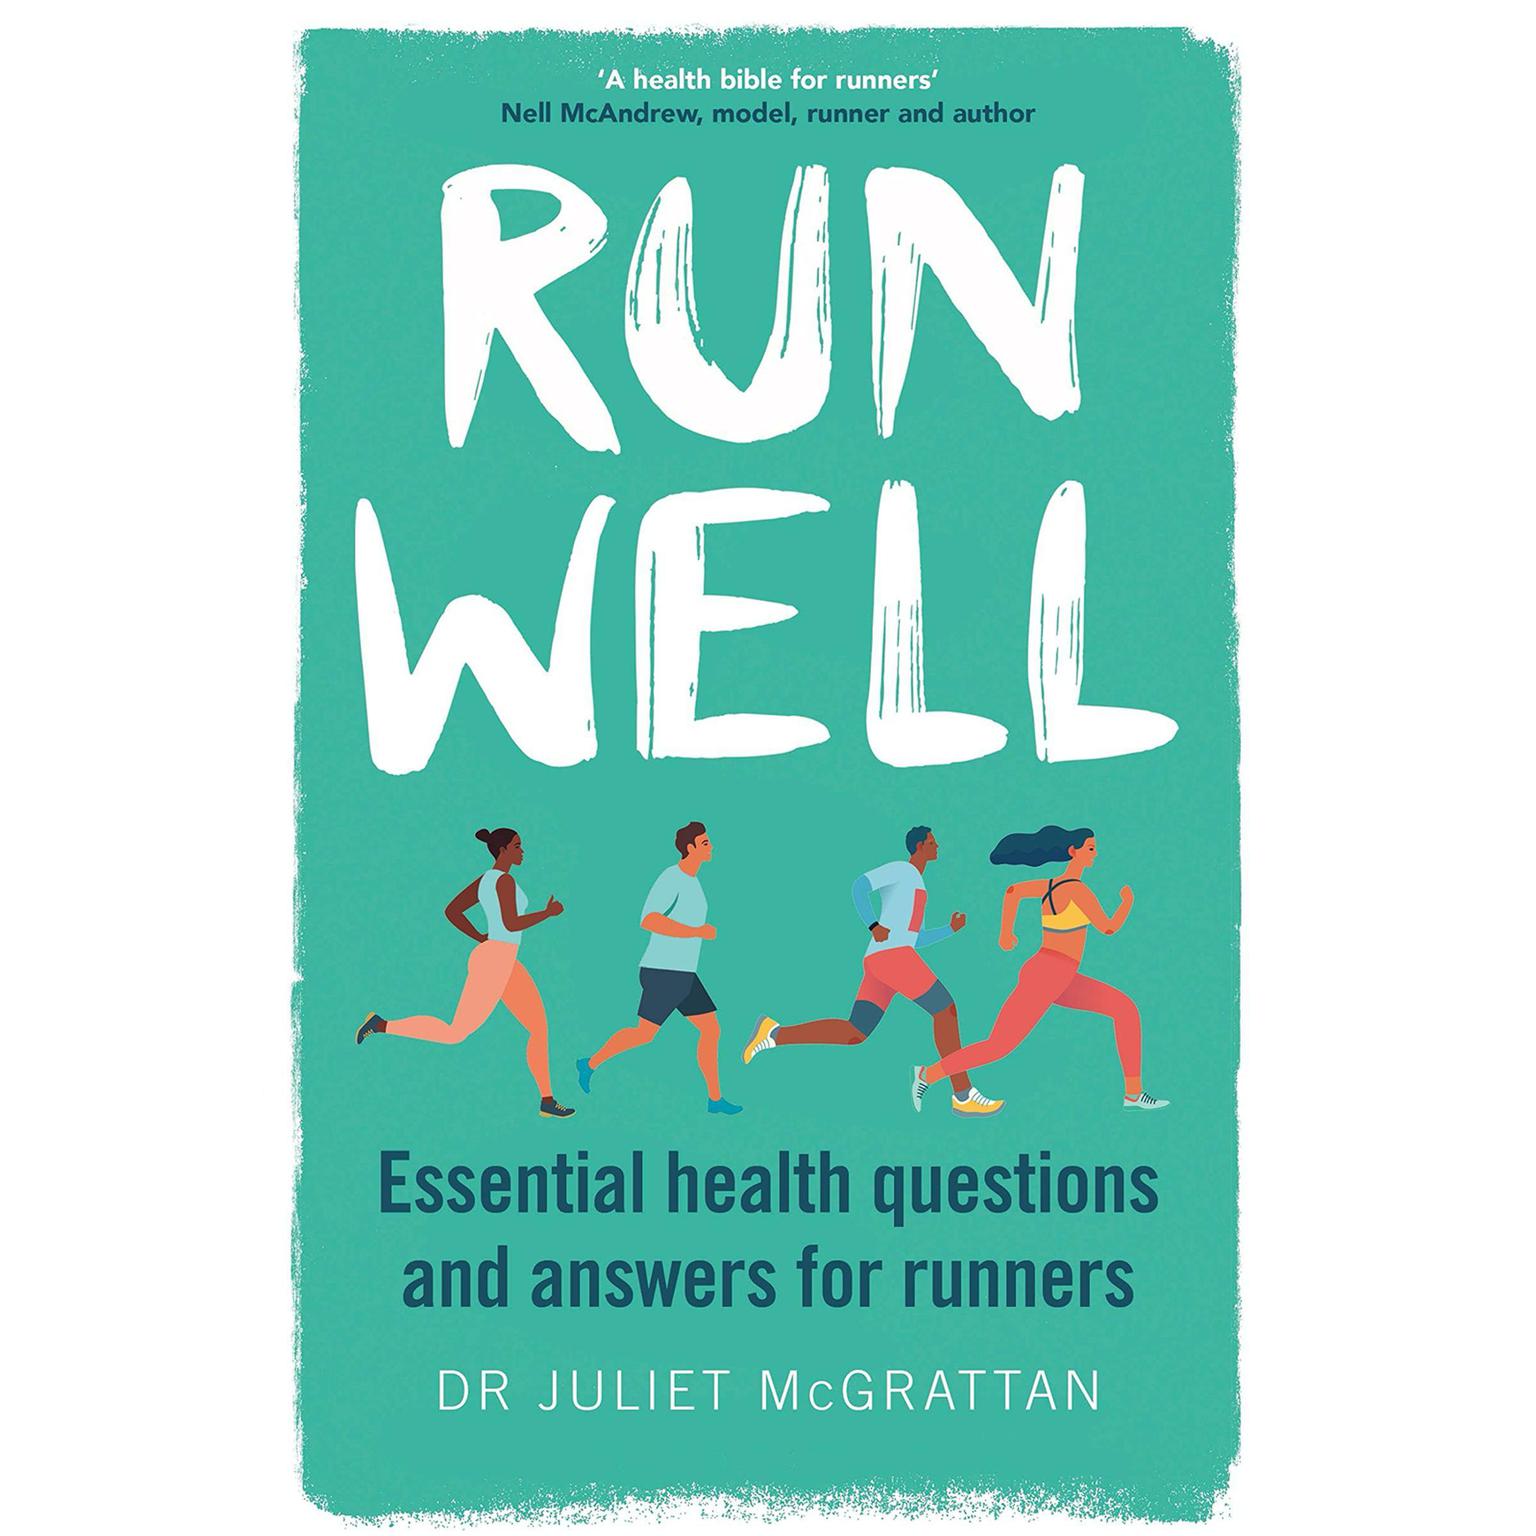 Run Well: Essential Health Questions and Answers for Runners Audiobook, by Juliet McGrattan